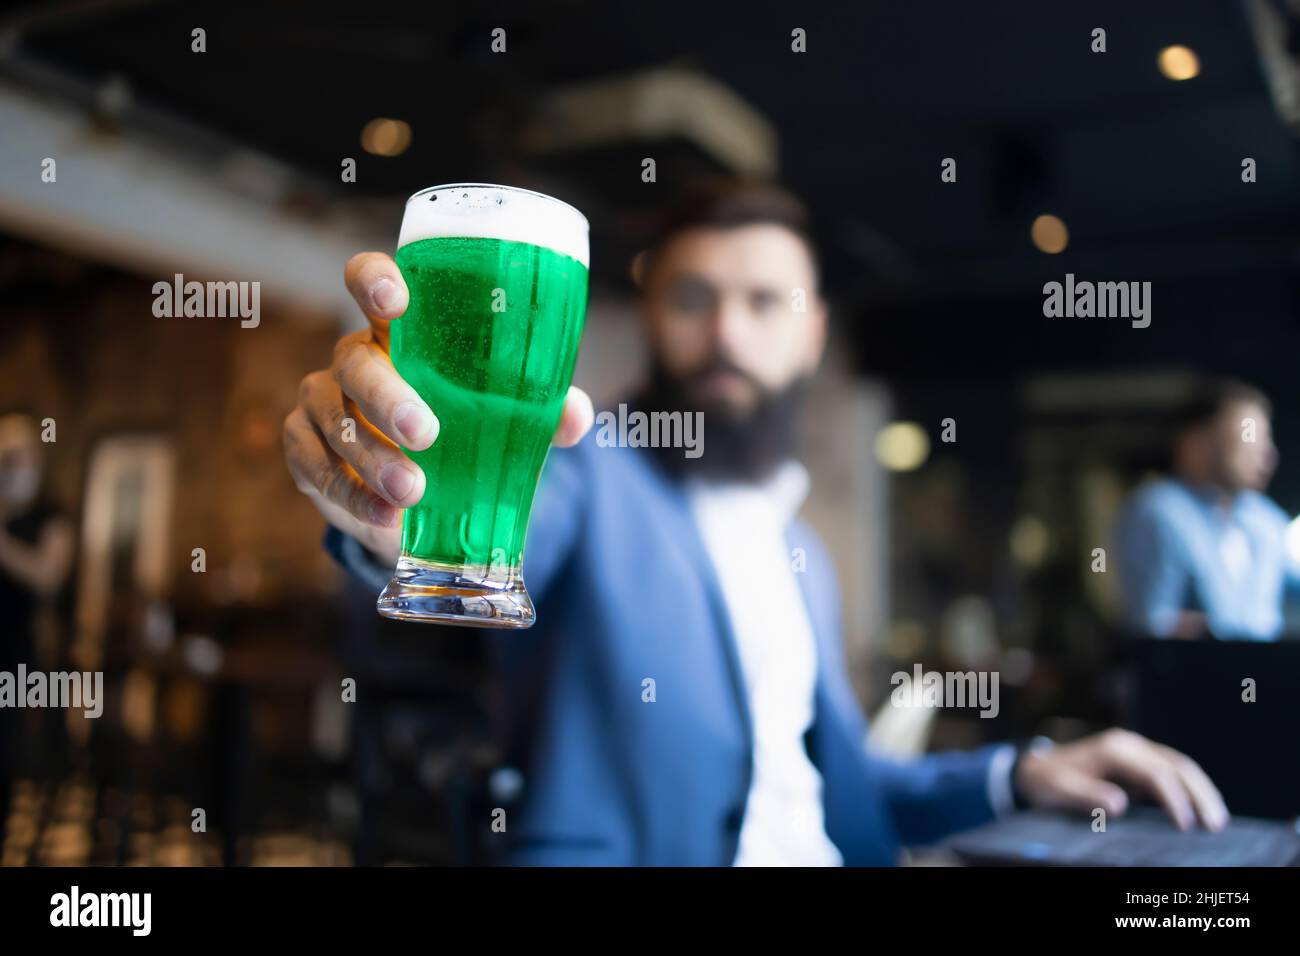 A man holding green glass of beer in a pub during St. Patrick's Day Stock Photo